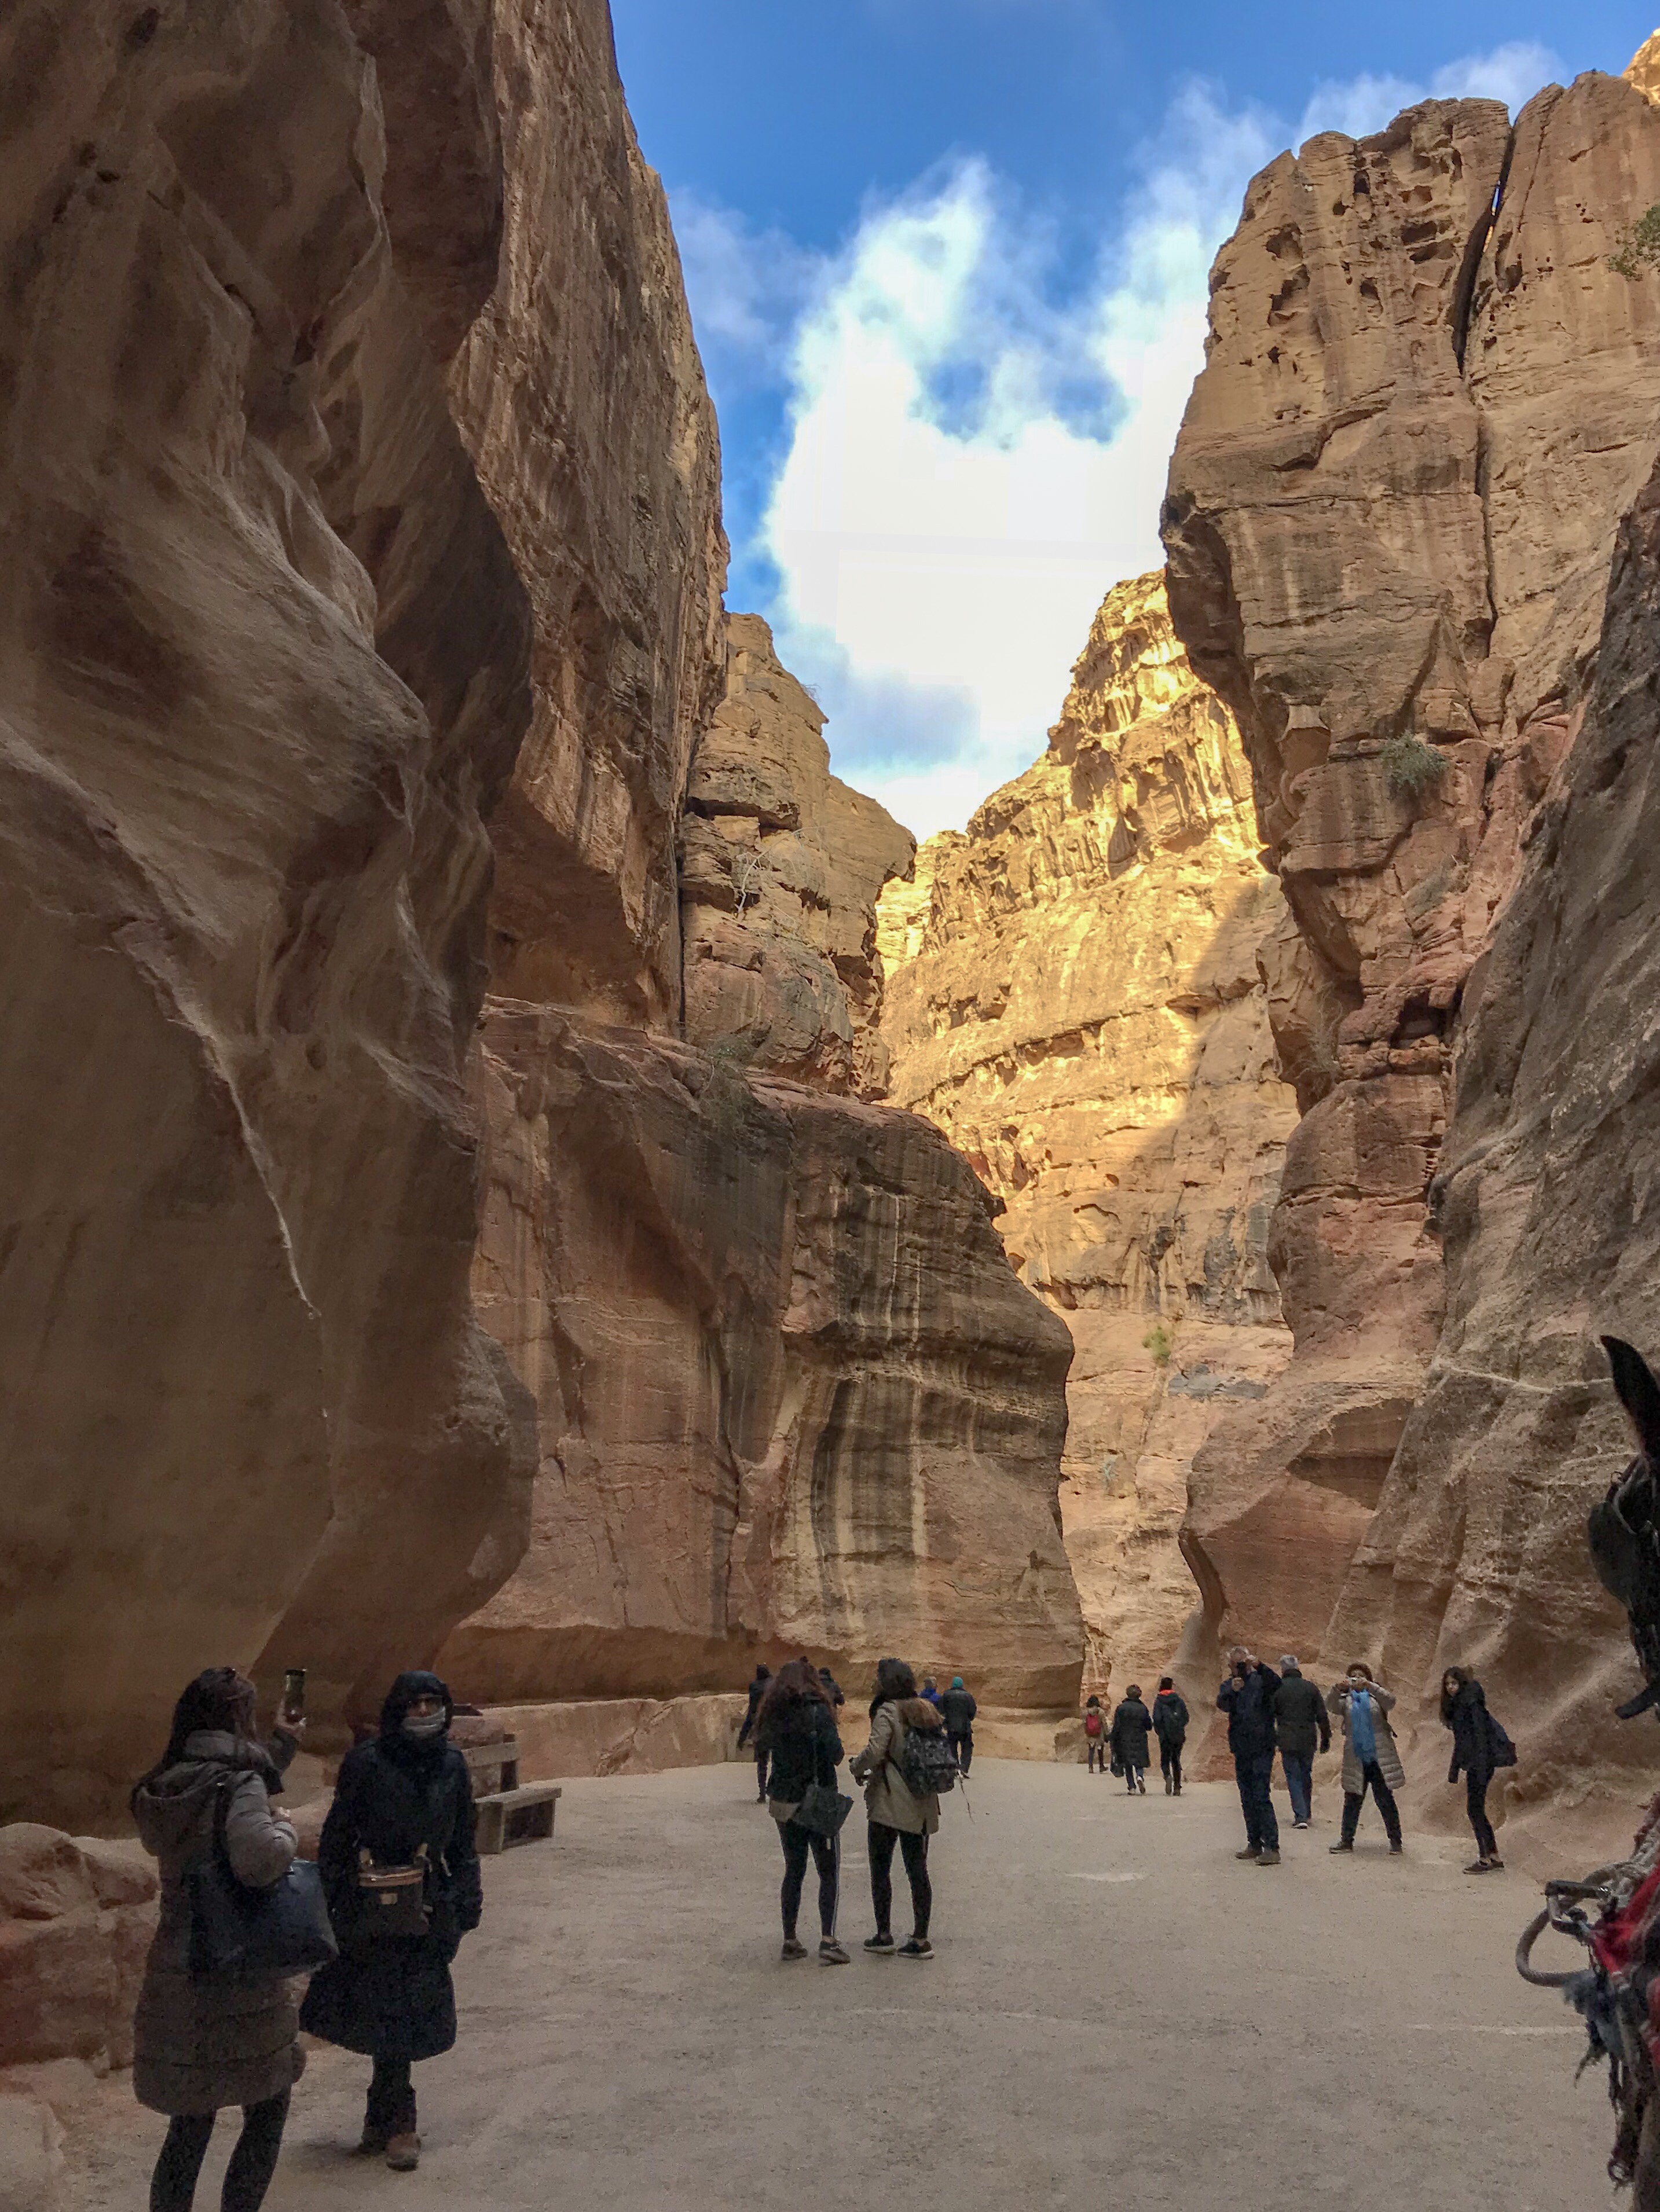 The high rock walls on either side of the Siq provide really dramatic scenes!